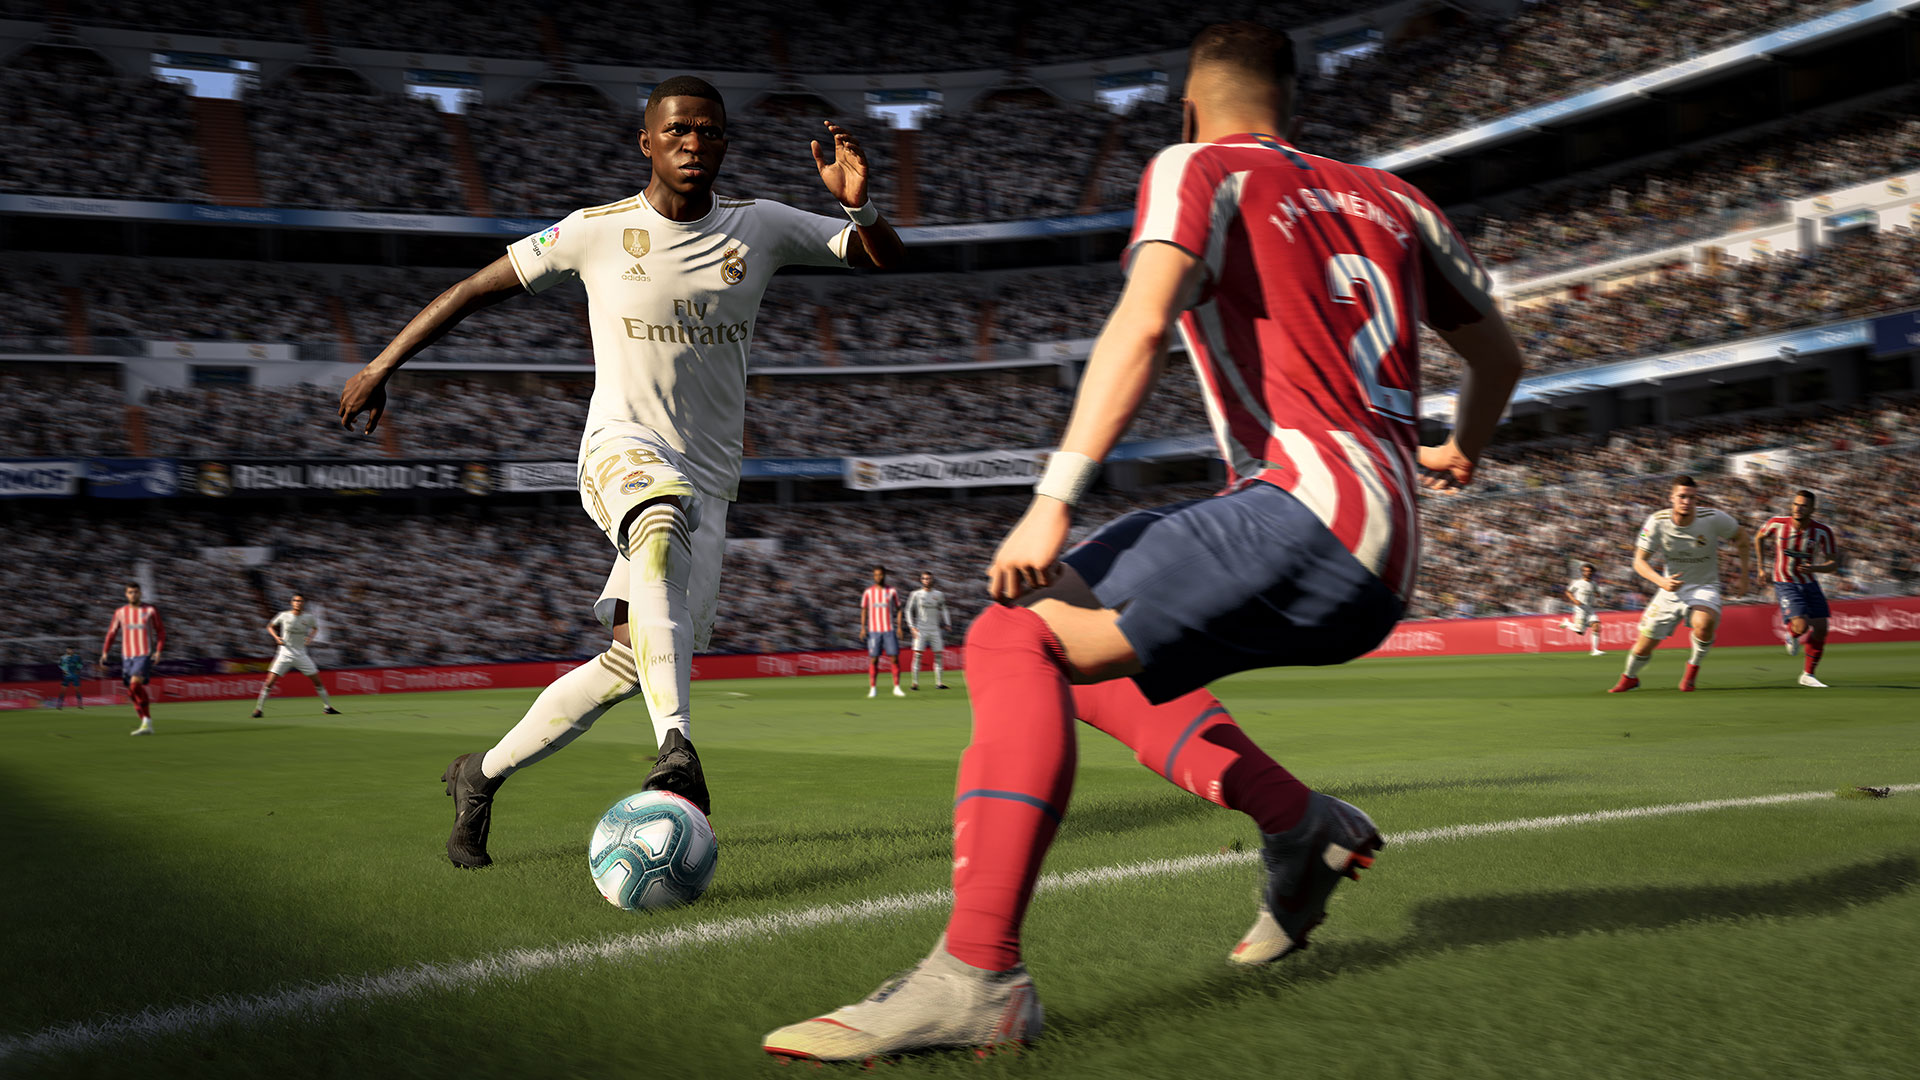 fifa 20 price on playstation store